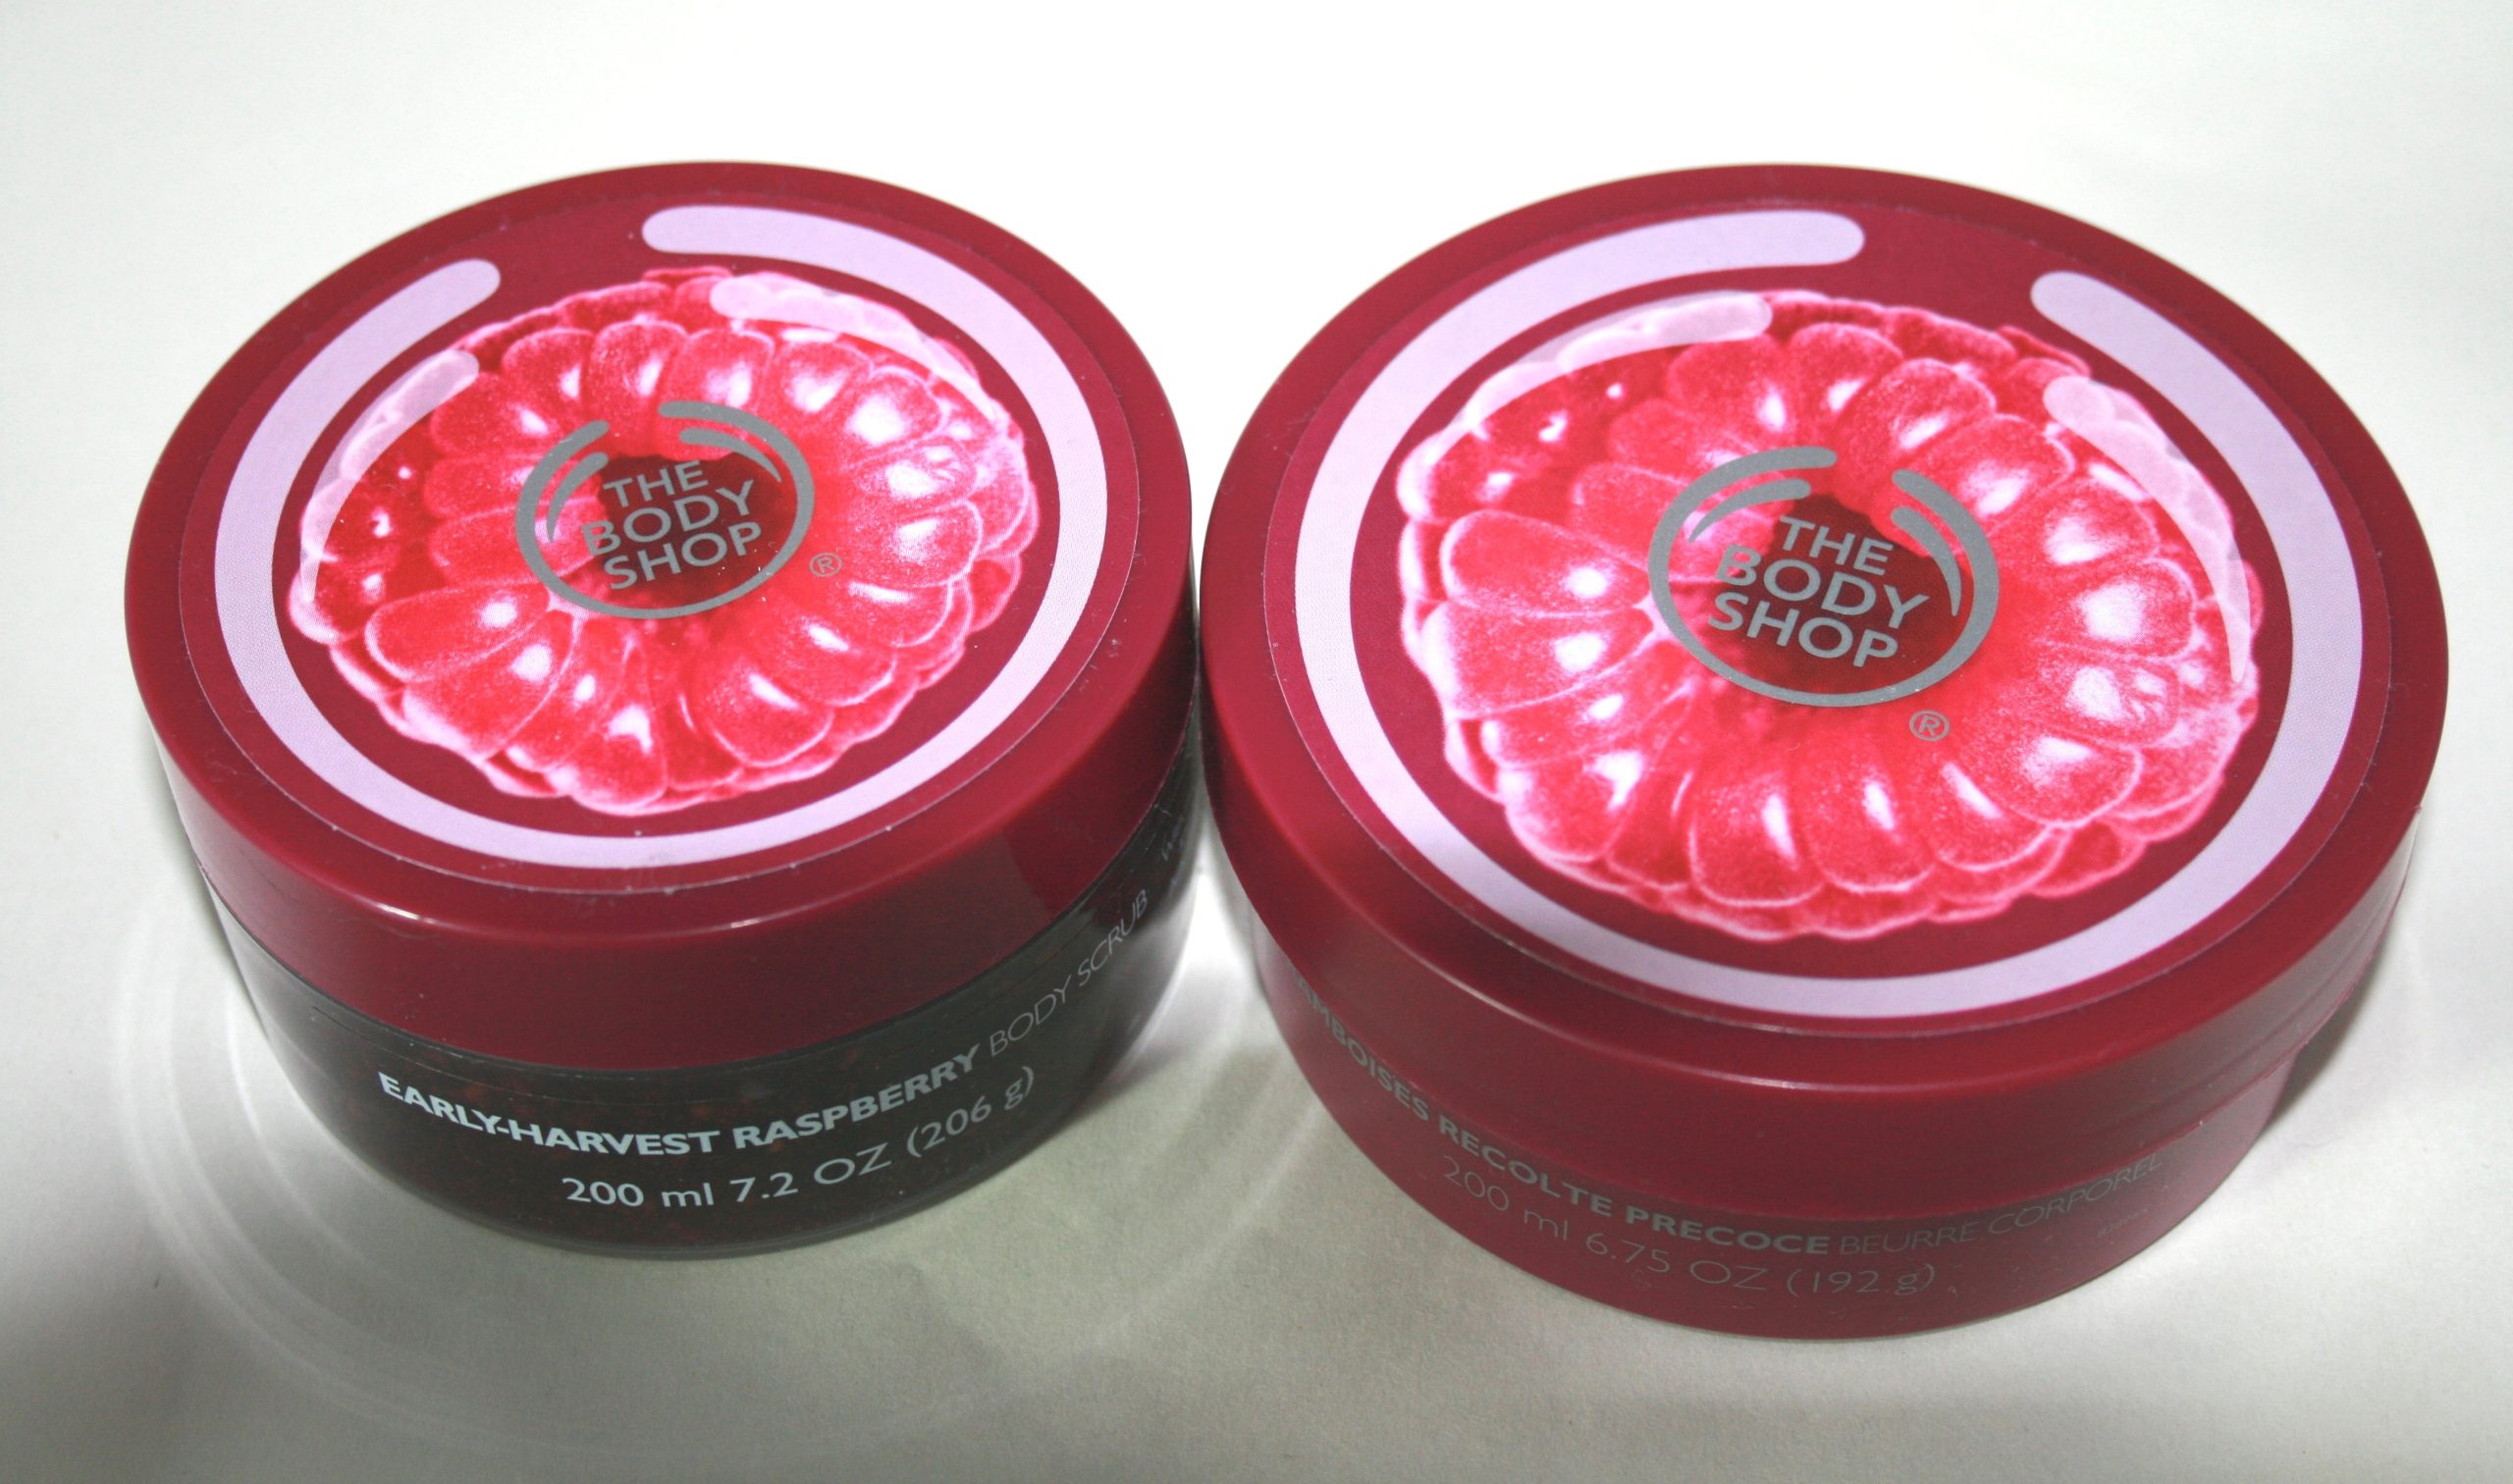 The Body Shop Early-Harvest Raspberry Body Butter and Body Scrub